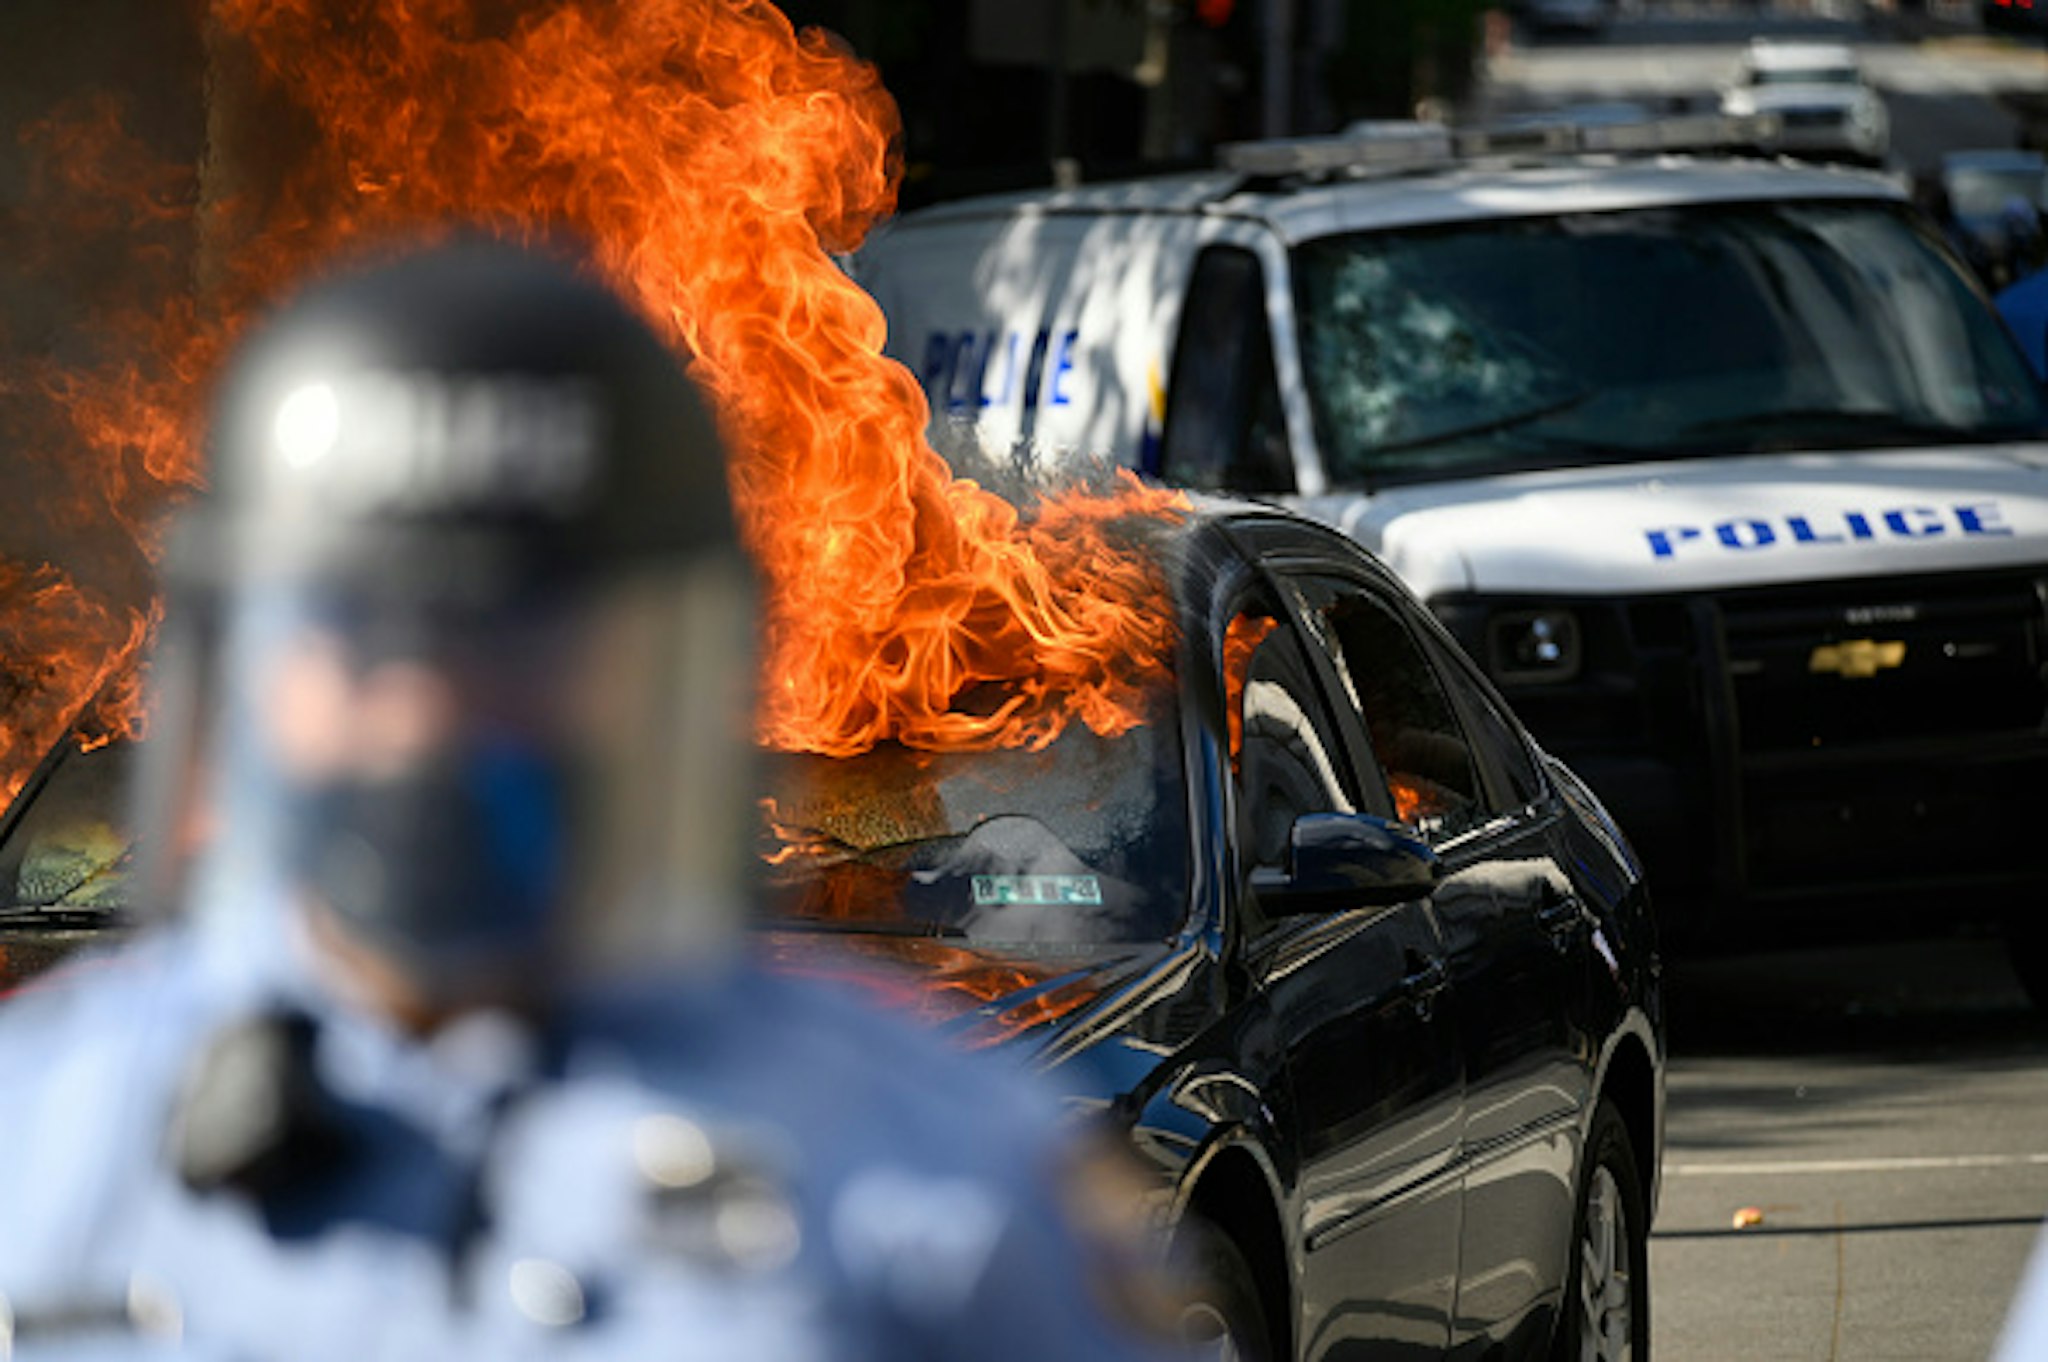 Protestors clash with police near City Hall, in Philadelphia, PA on May 30, 2020. Cities around the nation see thousands take to the streets to protest police brutality after the murder of George Floyd.